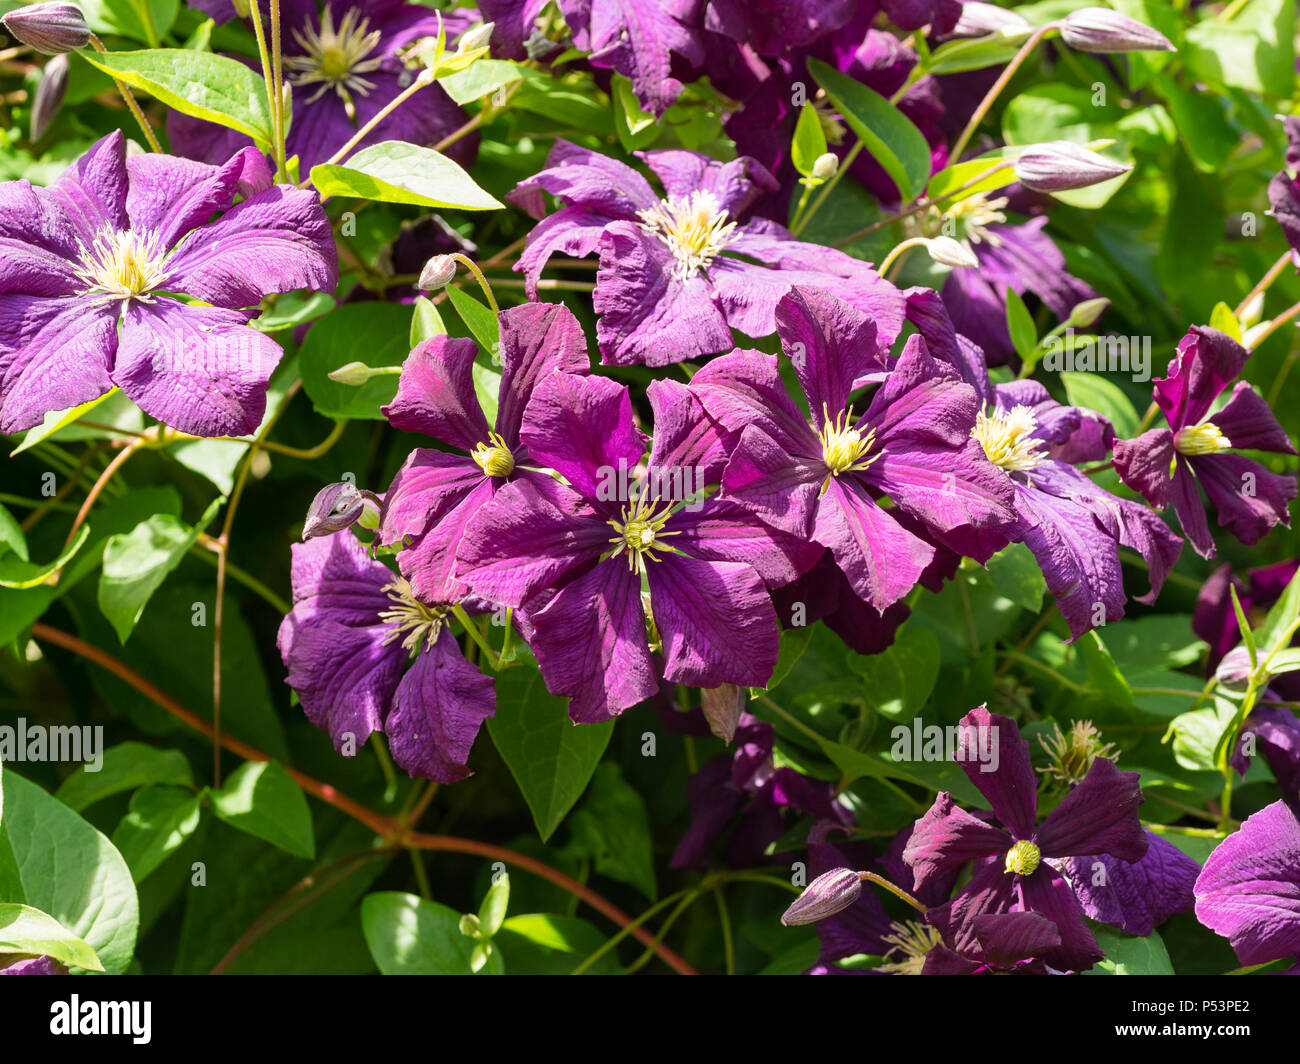 Singe violet-purple summer flowers of the hardy climber, Clematis viticella 'Etoile Violette' Stock Photo